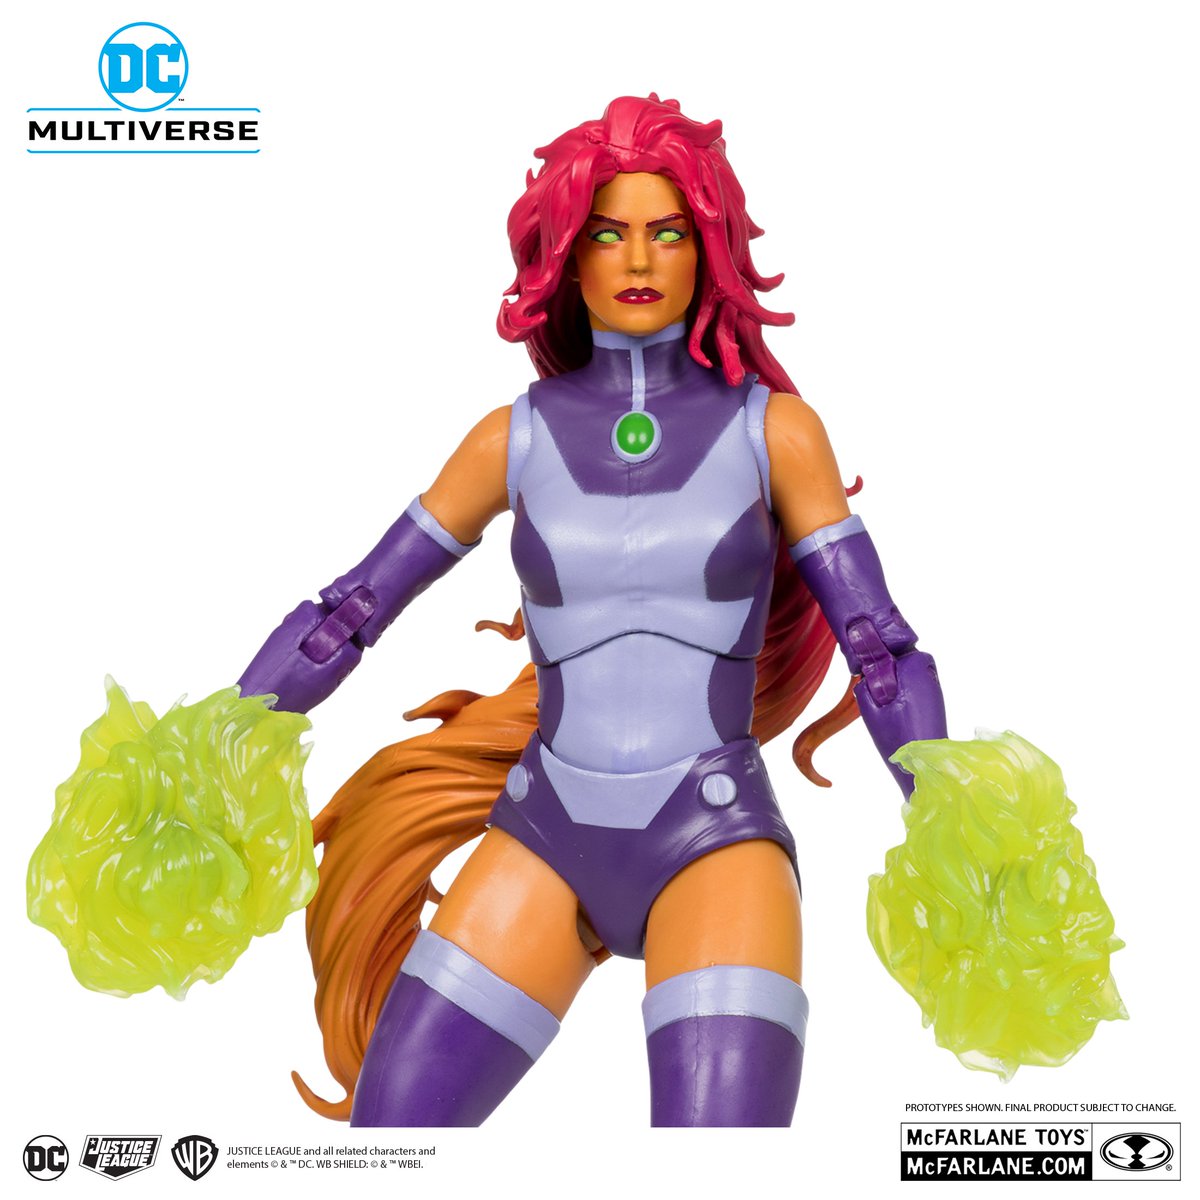 I know that #ToddMcFarlane is a raging misogynist but he really had to put the cherry on top by deciding to put Starfire in this outfit of all outfits💀